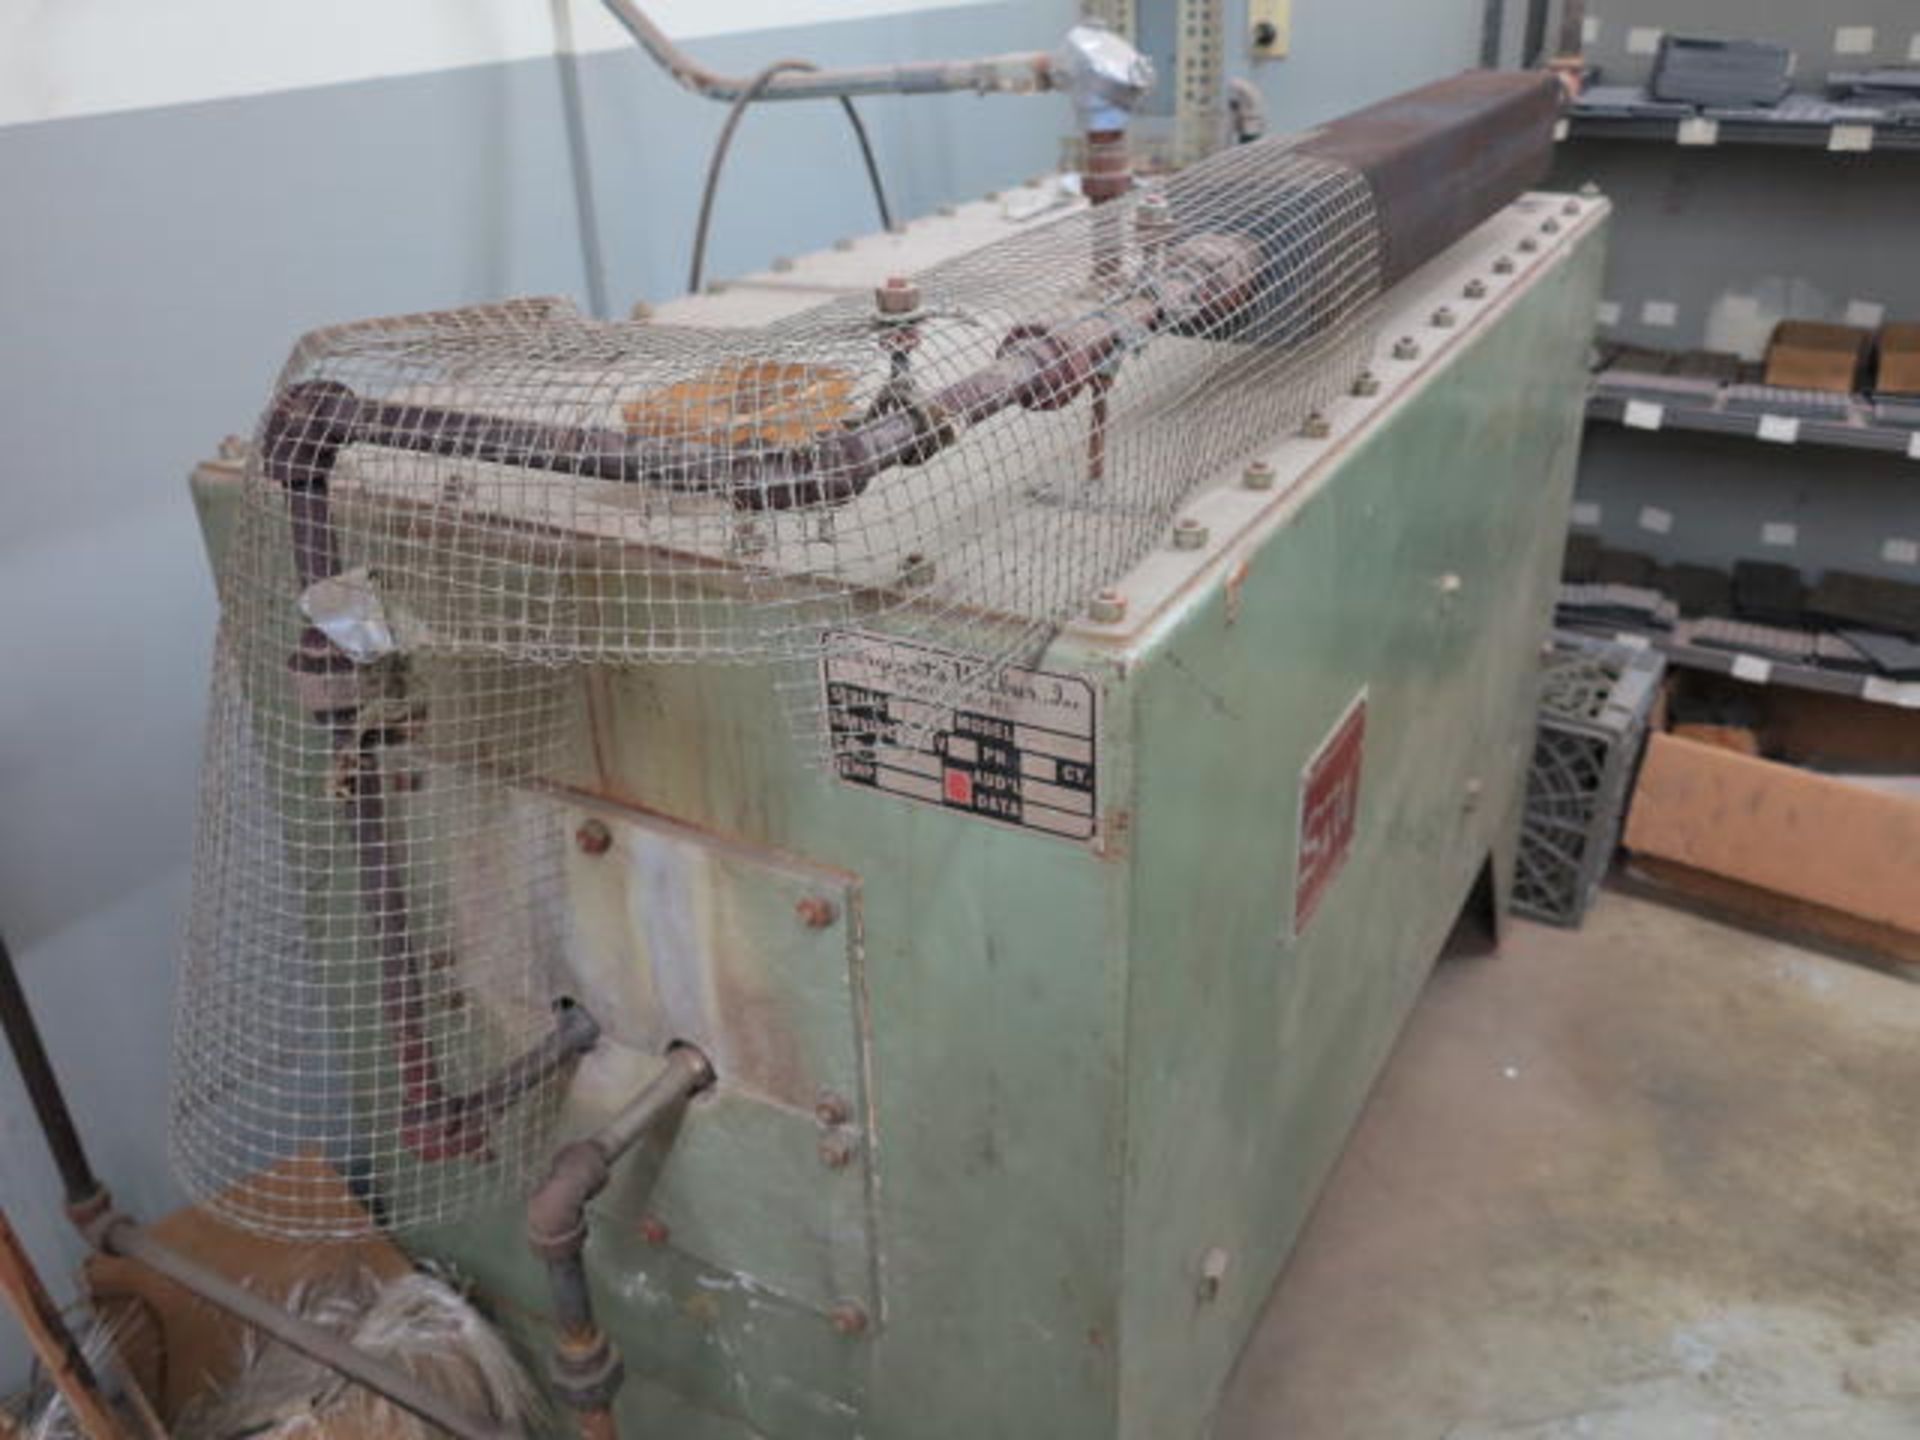 Sargeant & WIlbur 6'' Conveyor Oven Model CEW-060318 S/N 640202-F with Control Panel and Model GAD- - Image 4 of 5